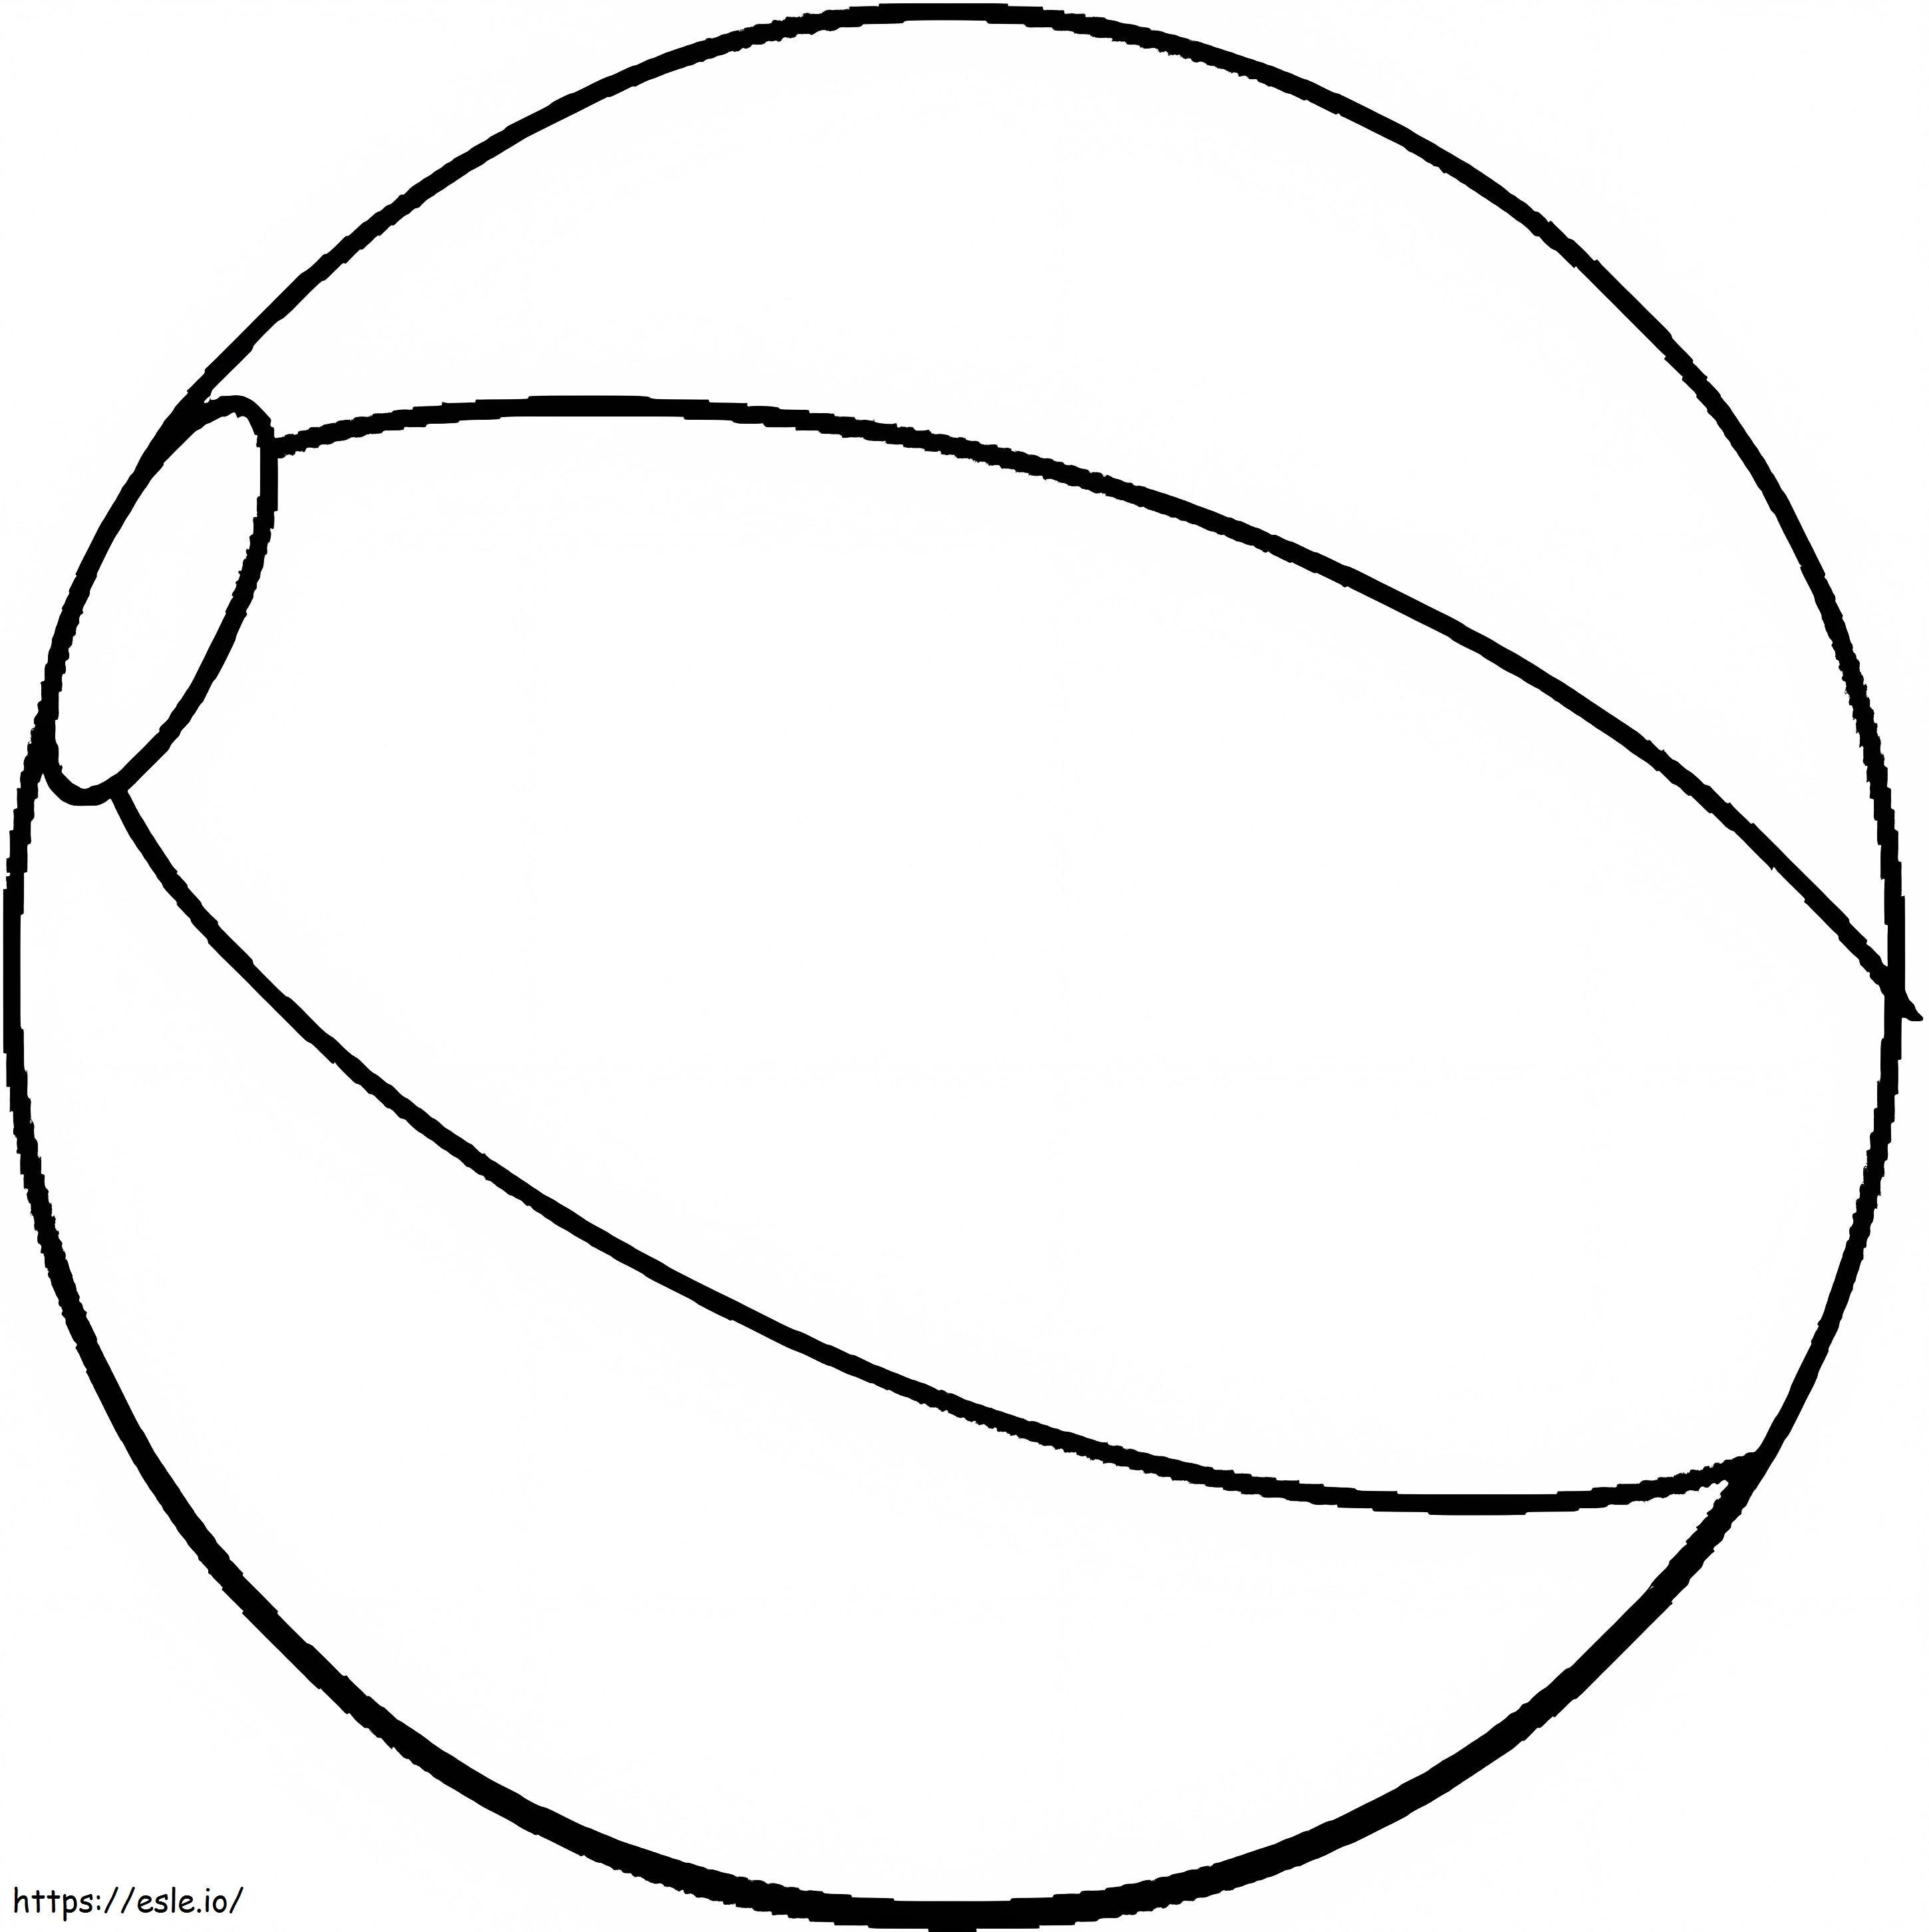 A Beach Ball coloring page